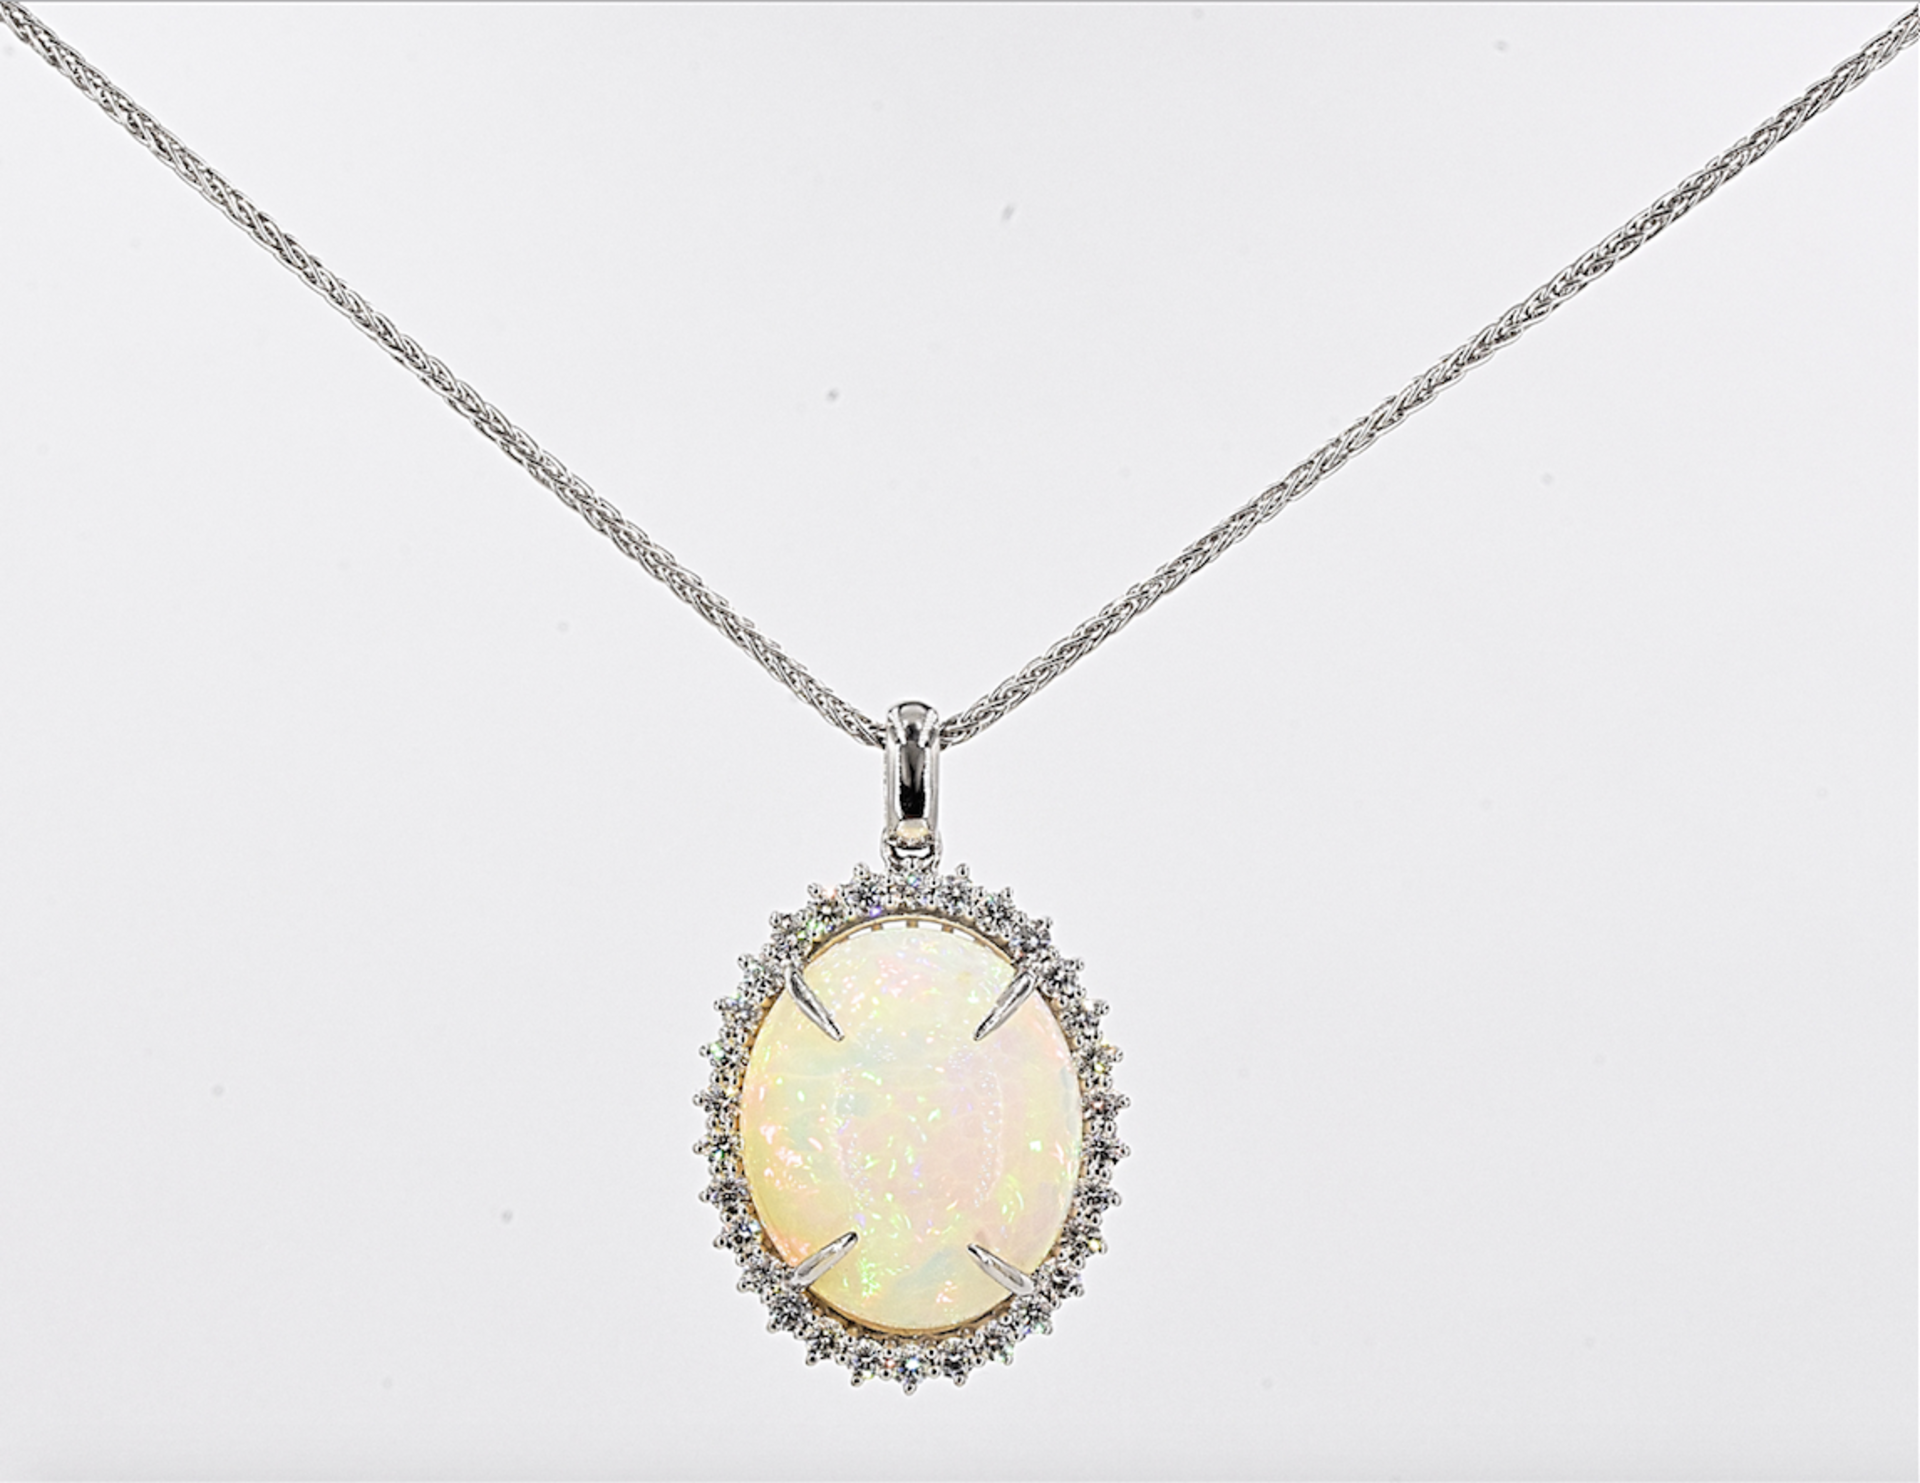 Necklace - 31.10 Ct. Opal - 1.88 Ct Diamonds - Image 2 of 7